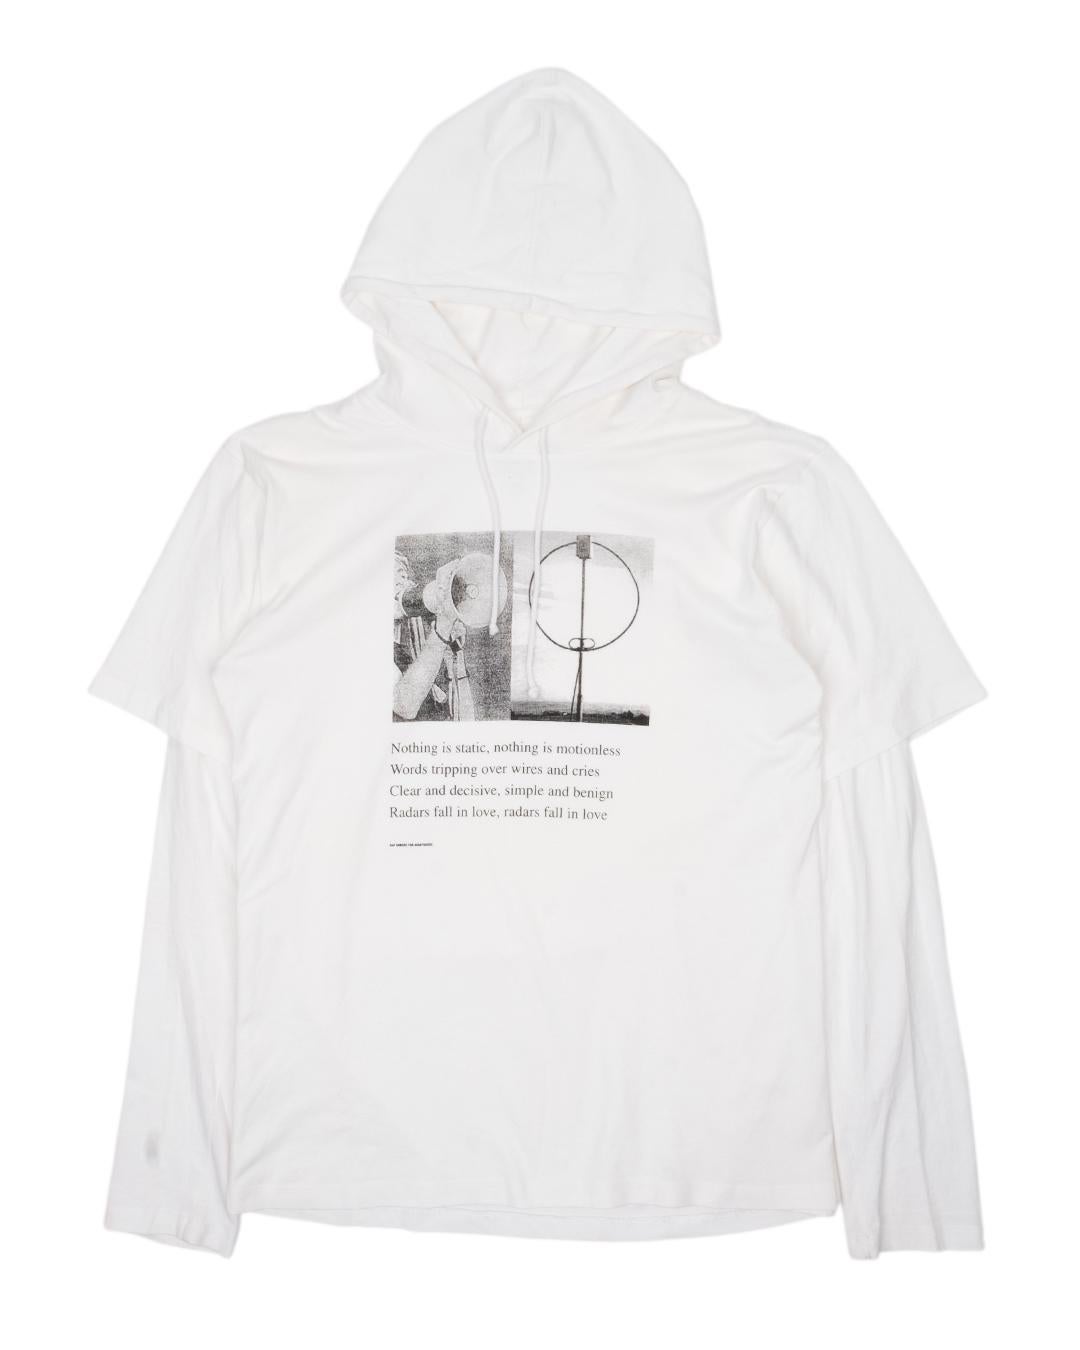 This hoodie was not directly tied to any collection, and was rather created for especially for the boutique, Avantgarde. The style is immeidately reminiscent of Raf’s graphic work from the era, juxtoposing collage imagery against words that imply